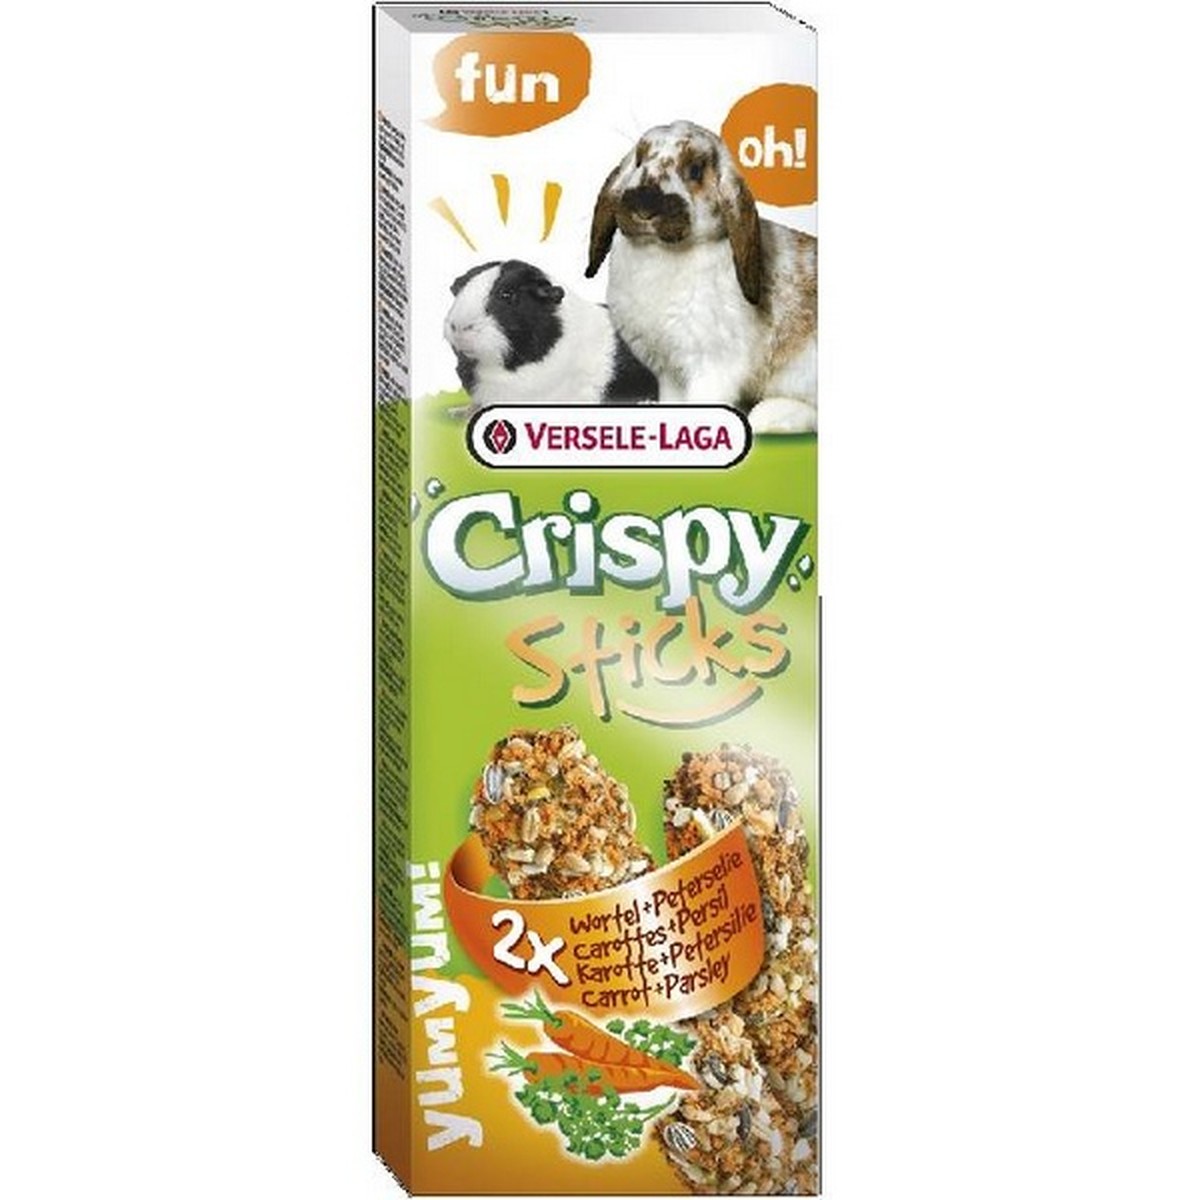   Sticks Lapins-Cobayes Carrotte&Persil 110g  110g